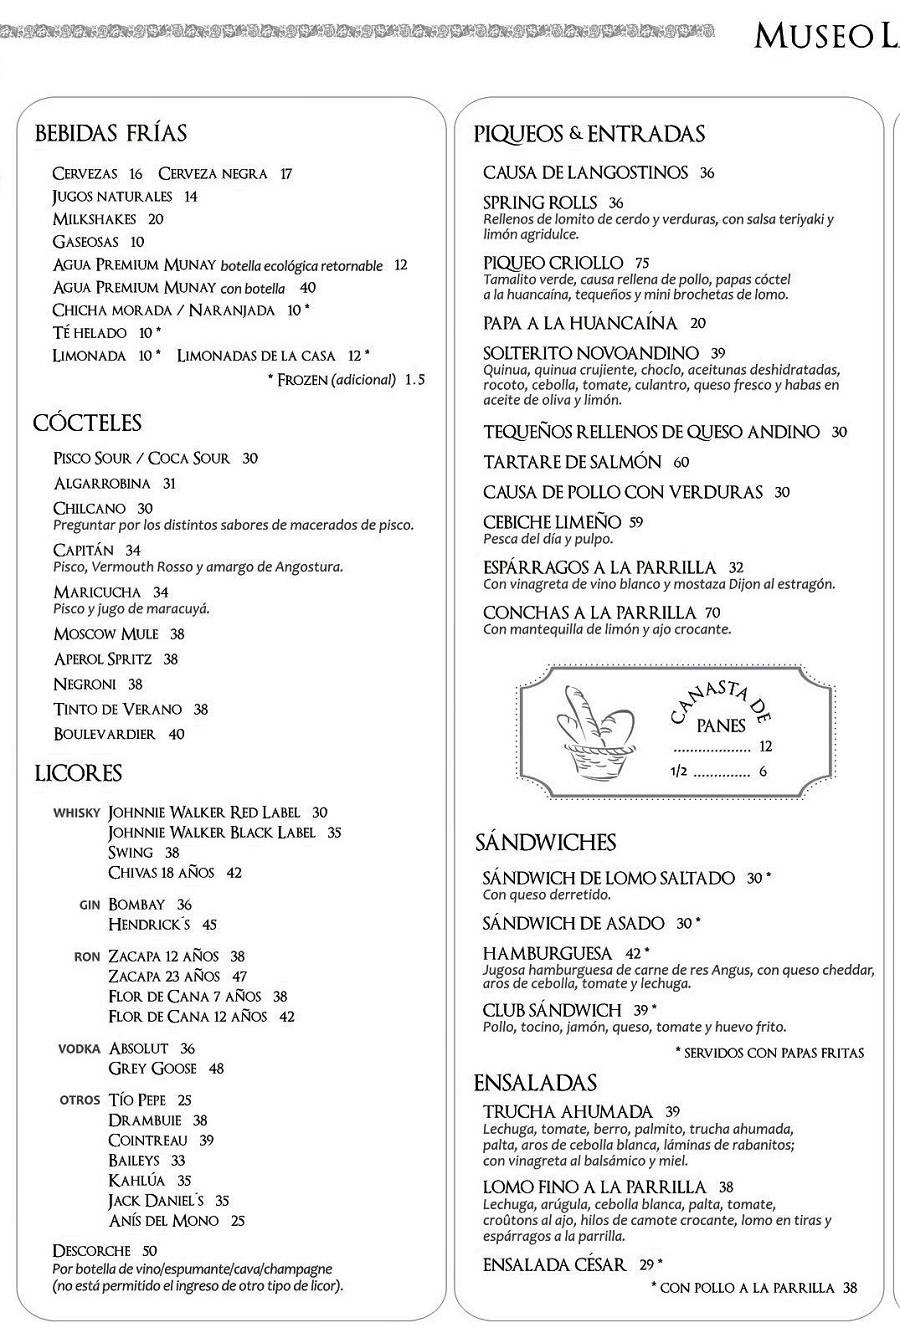 Museo Larco Restaurant Menu with Prices p1